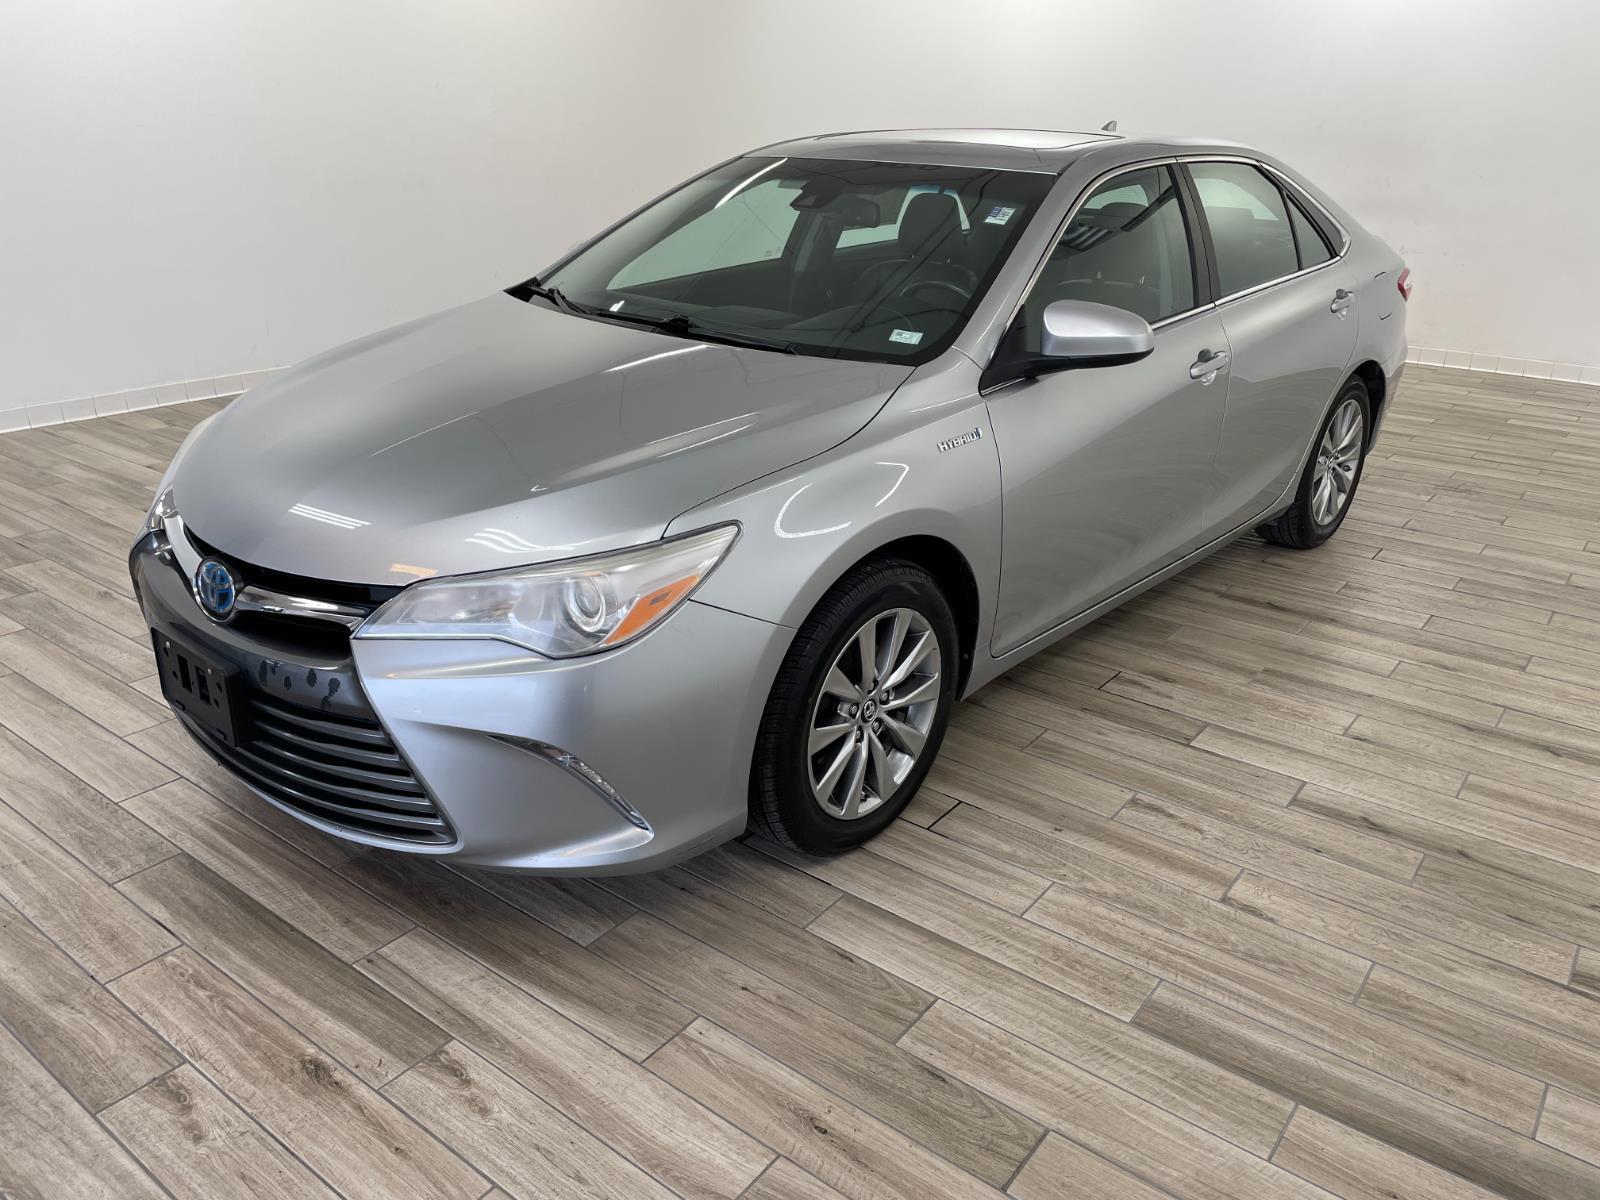 Pre-Owned 2017 Toyota Camry Hybrid XLE Sedan in O'Fallon #Z2066X | Travers  Automotive Group